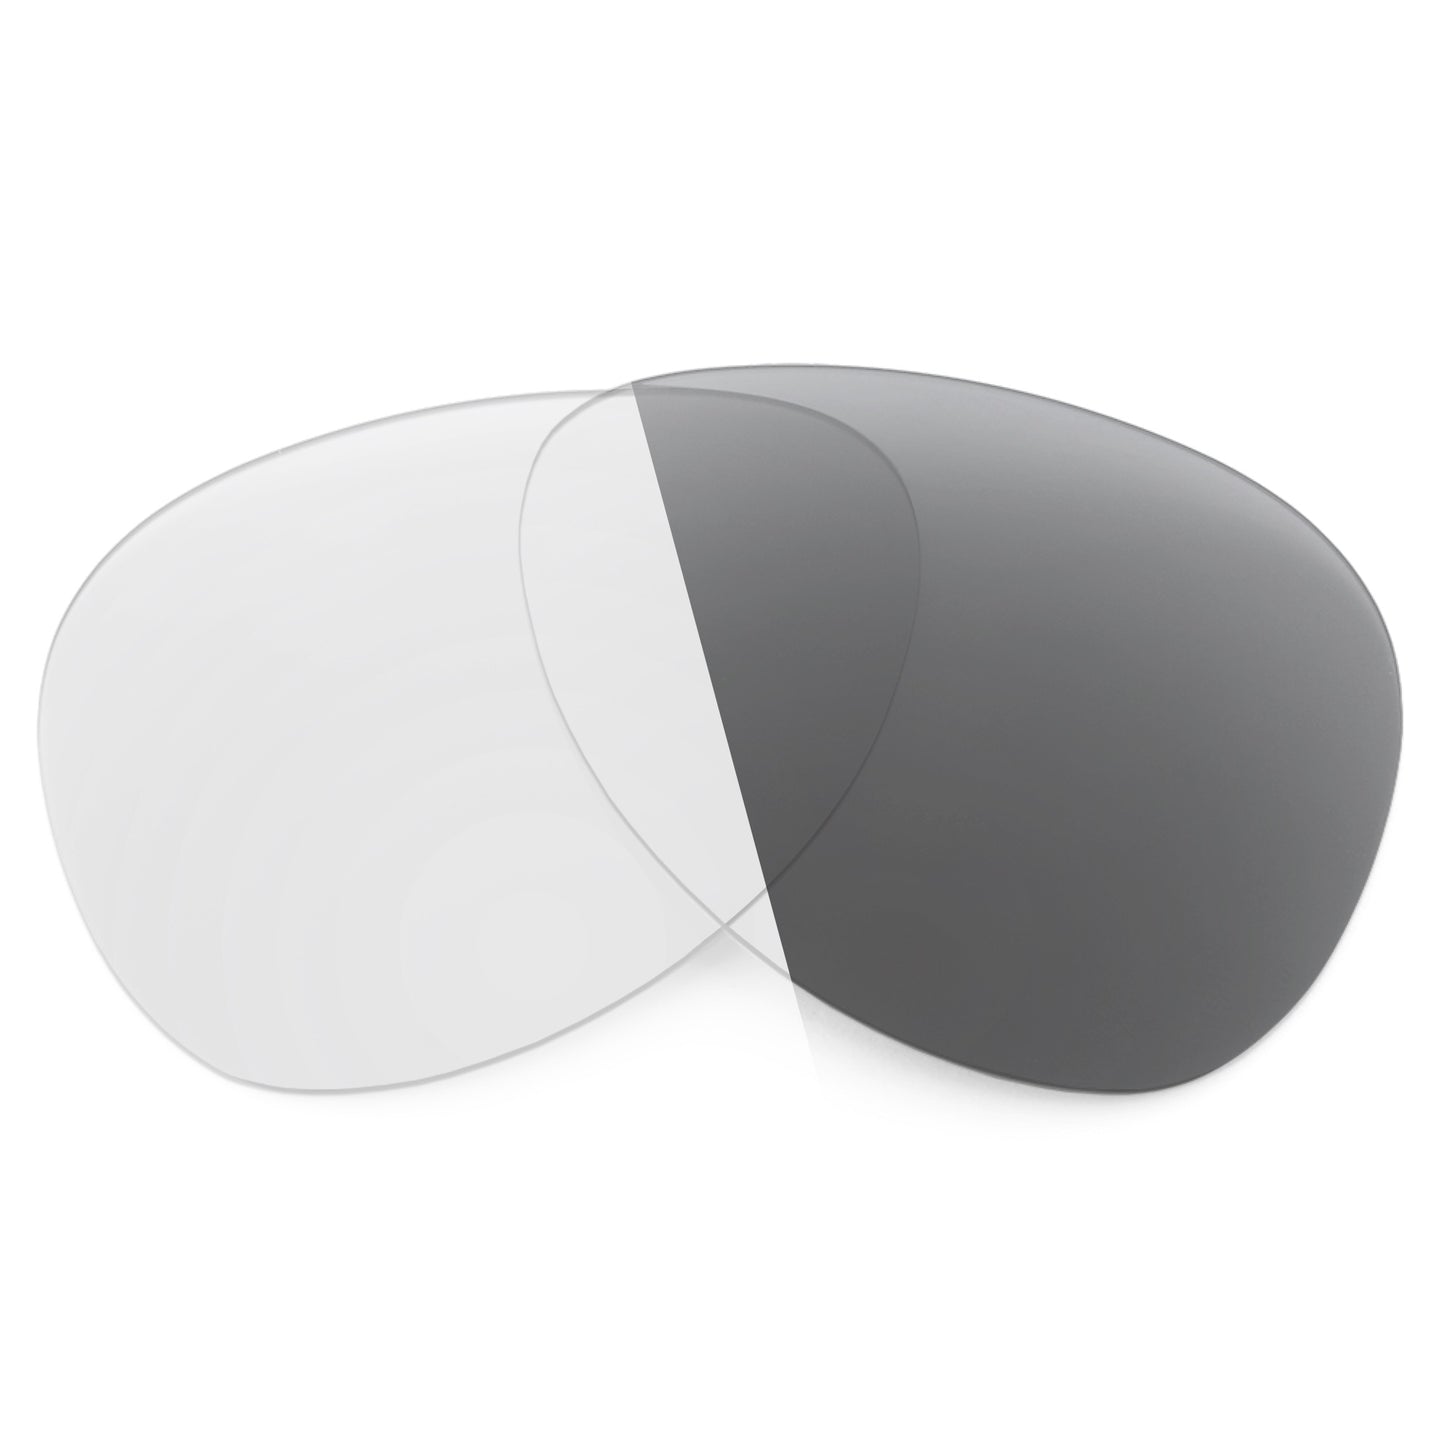 Revant replacement lenses for Ray-Ban Gatsby II RB4257 50mm Non-Polarized Adapt Gray Photochromic